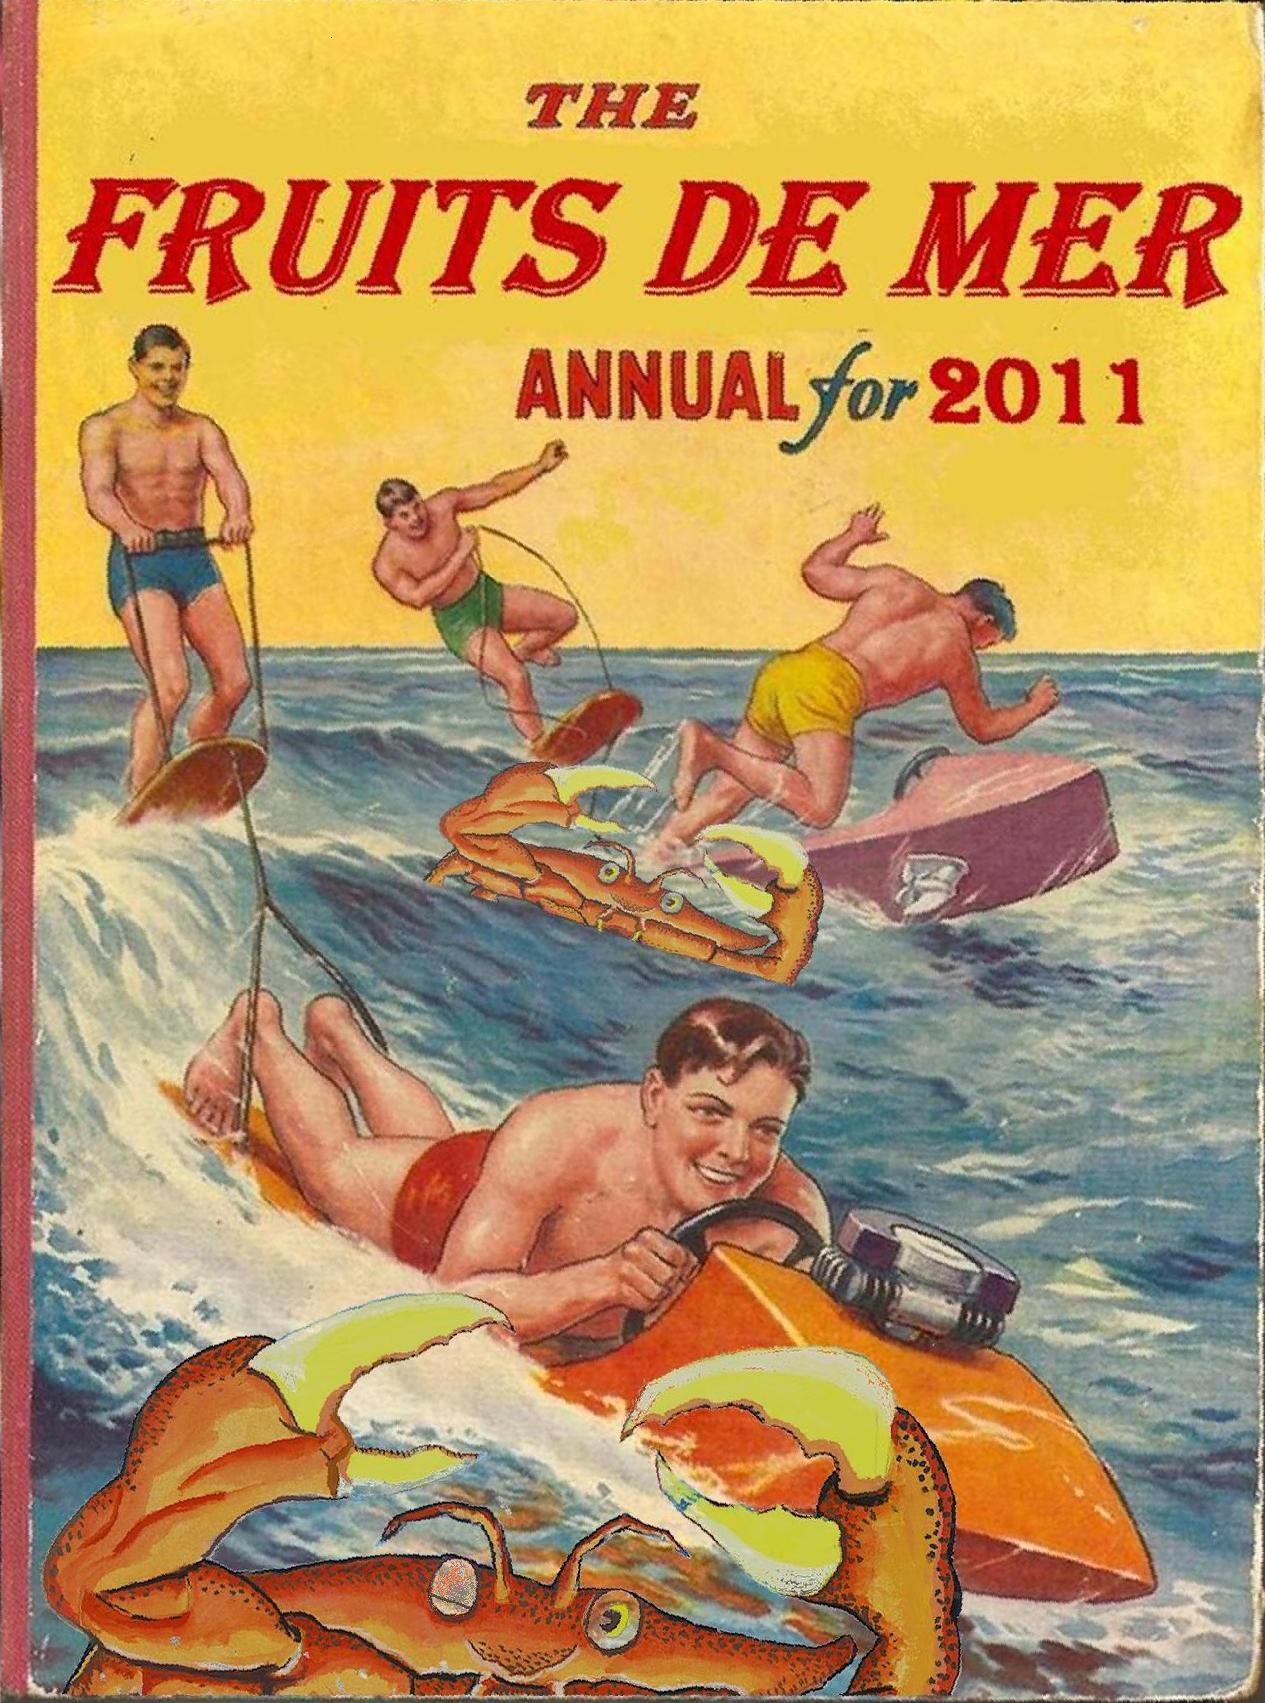 a trip back in time and a touch of the crabs - a free postcard with our 2011 Annual